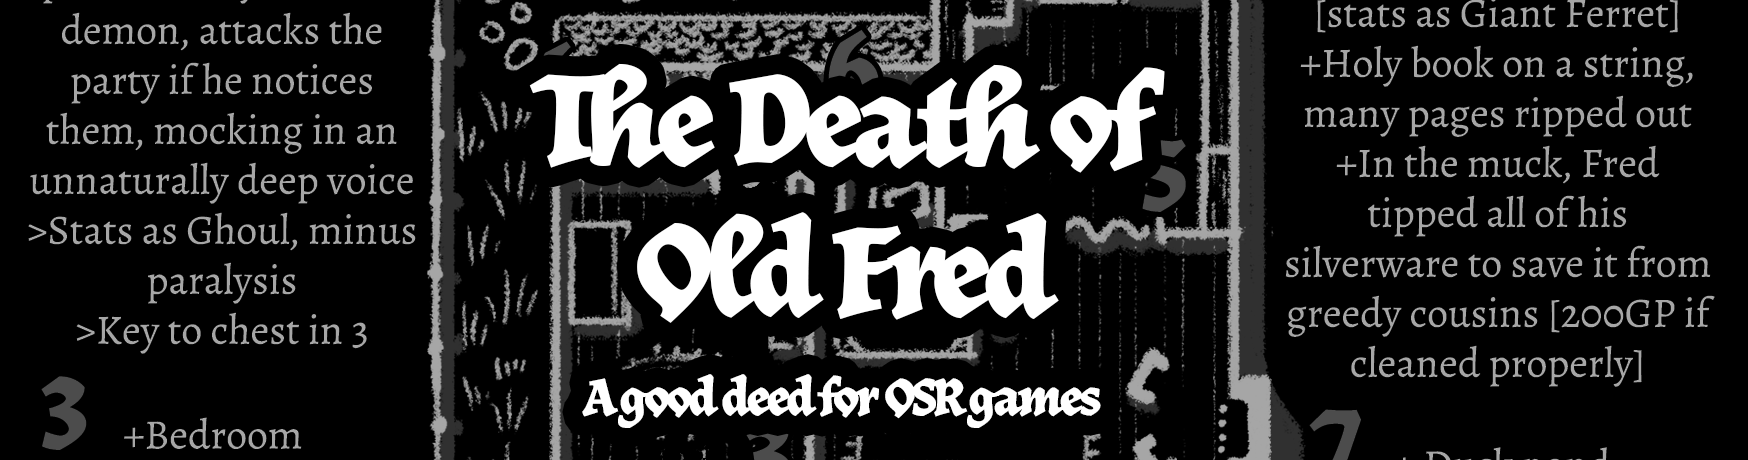 The Death of Old Fred